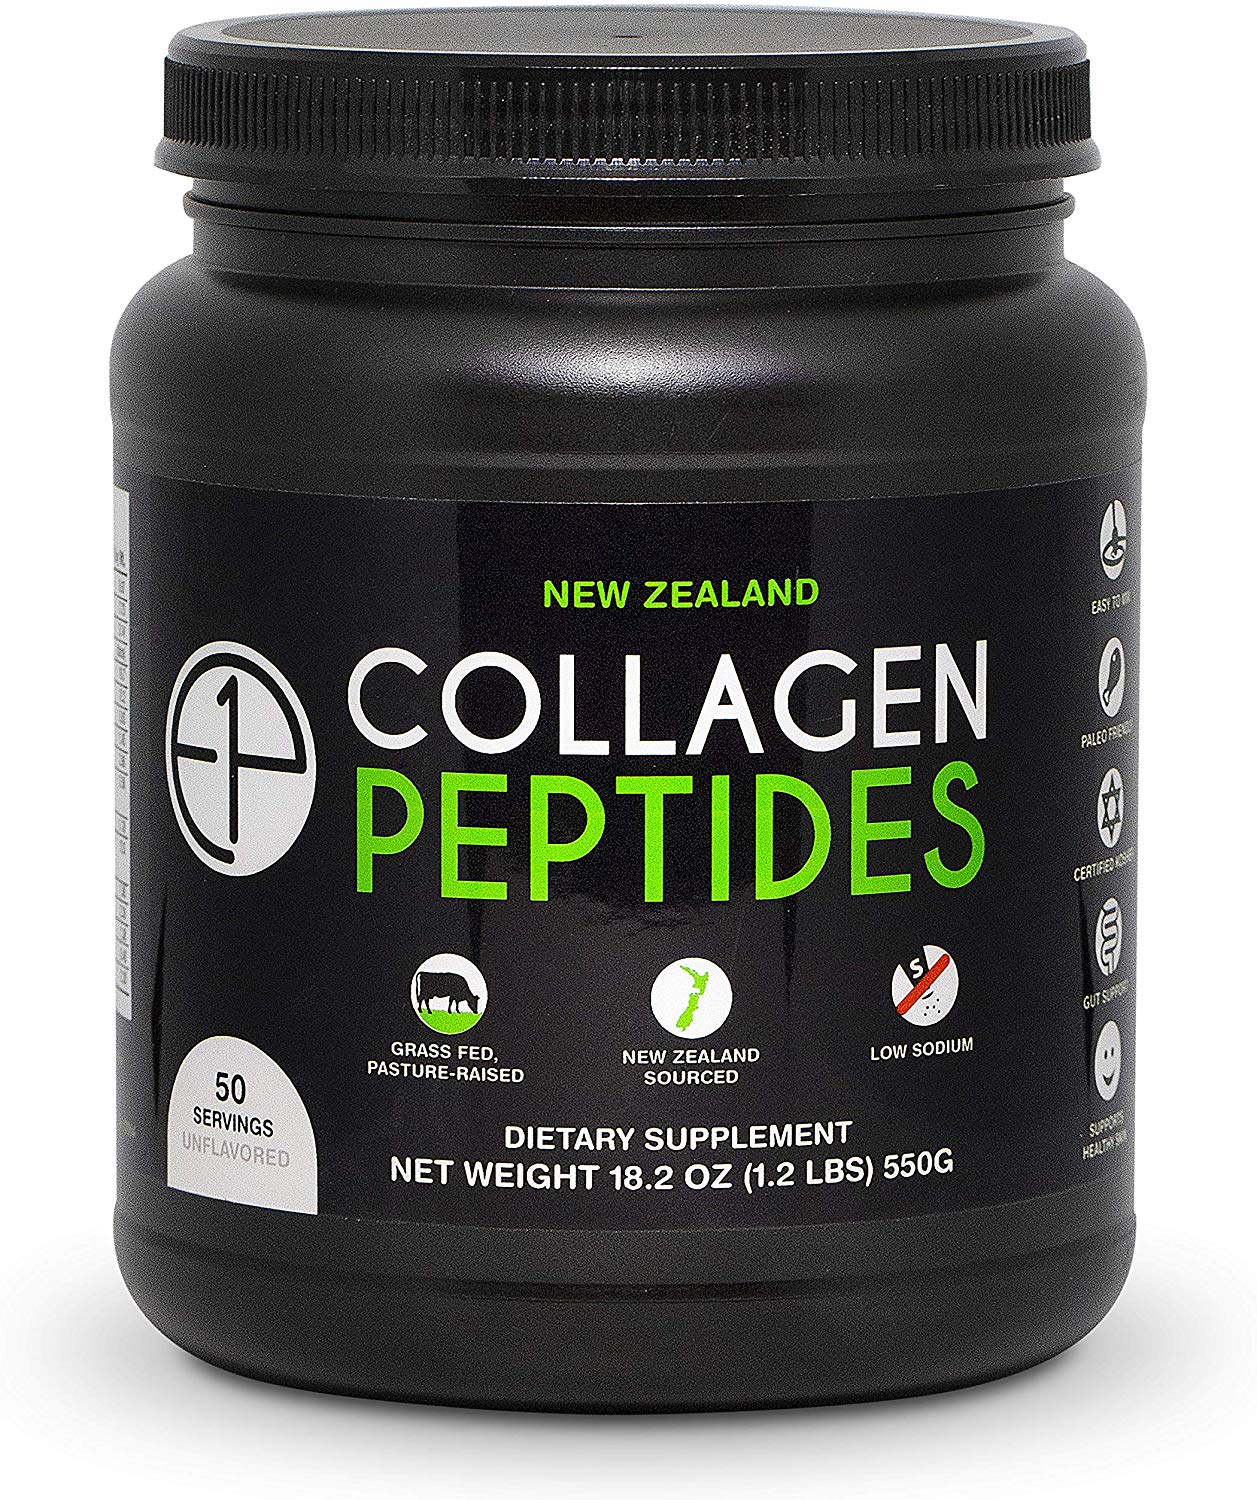 New Zealand Dietary Collagen Peptides Powder, 18.2-Ounce